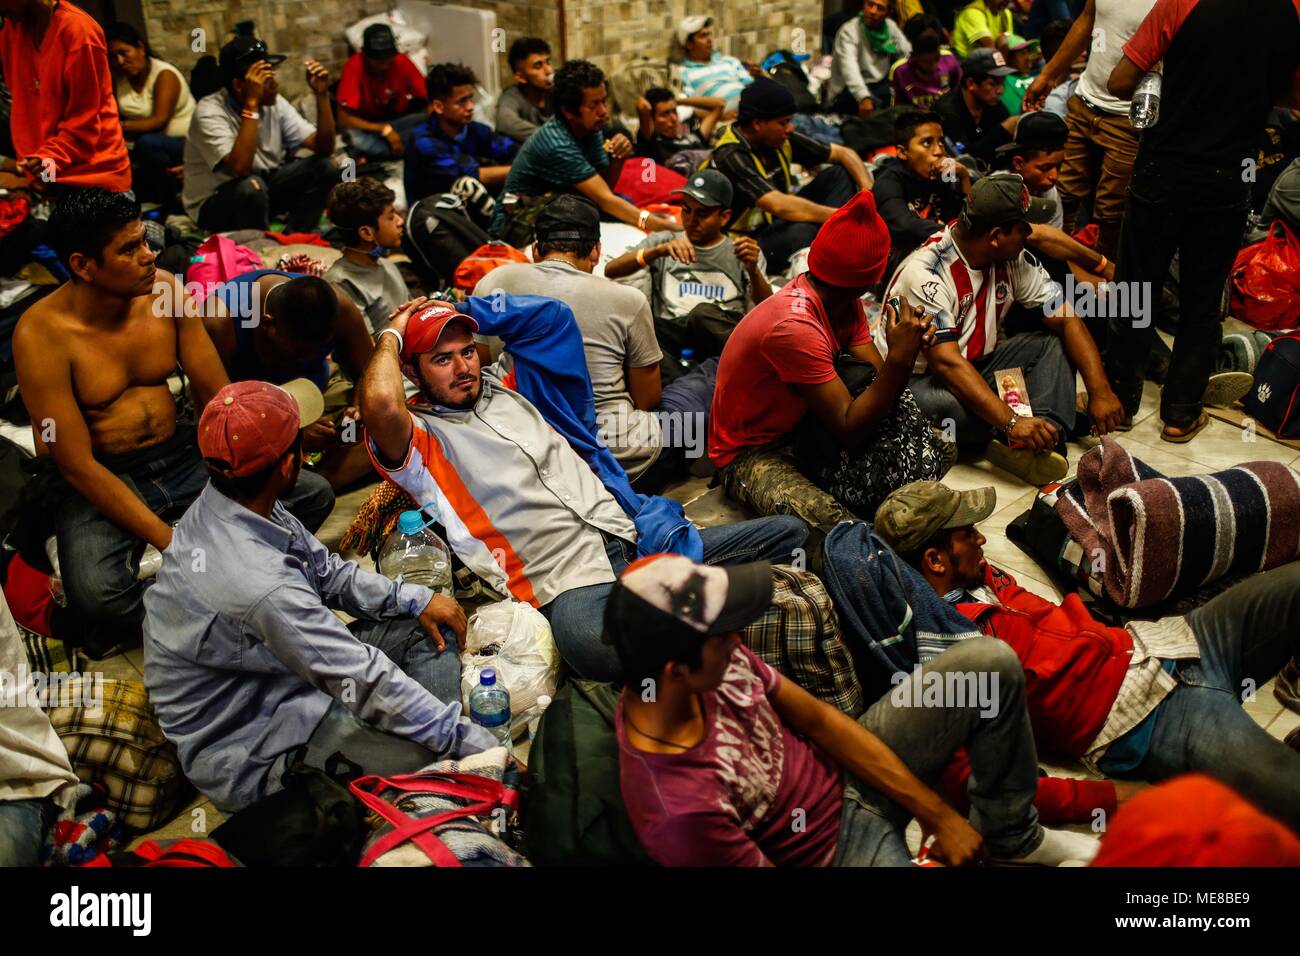 Sonora, Mexico, 21 April 2018. The Caravan of Migrants receive medical attention, food, personal hygiene and a place to rest in the community dining room of Colonia San Luis de Hermosillo, Sonora Mexico. Around 600 people, mostly of Central American origin, come from the southern border of the country and bound for the city of Tijuana. The caravan aims to request Asylum to the United States through a humanitarian visa, La Caravana provoked the wrath of President Donald Trump for this trip to the border with the United States. Stock Photo